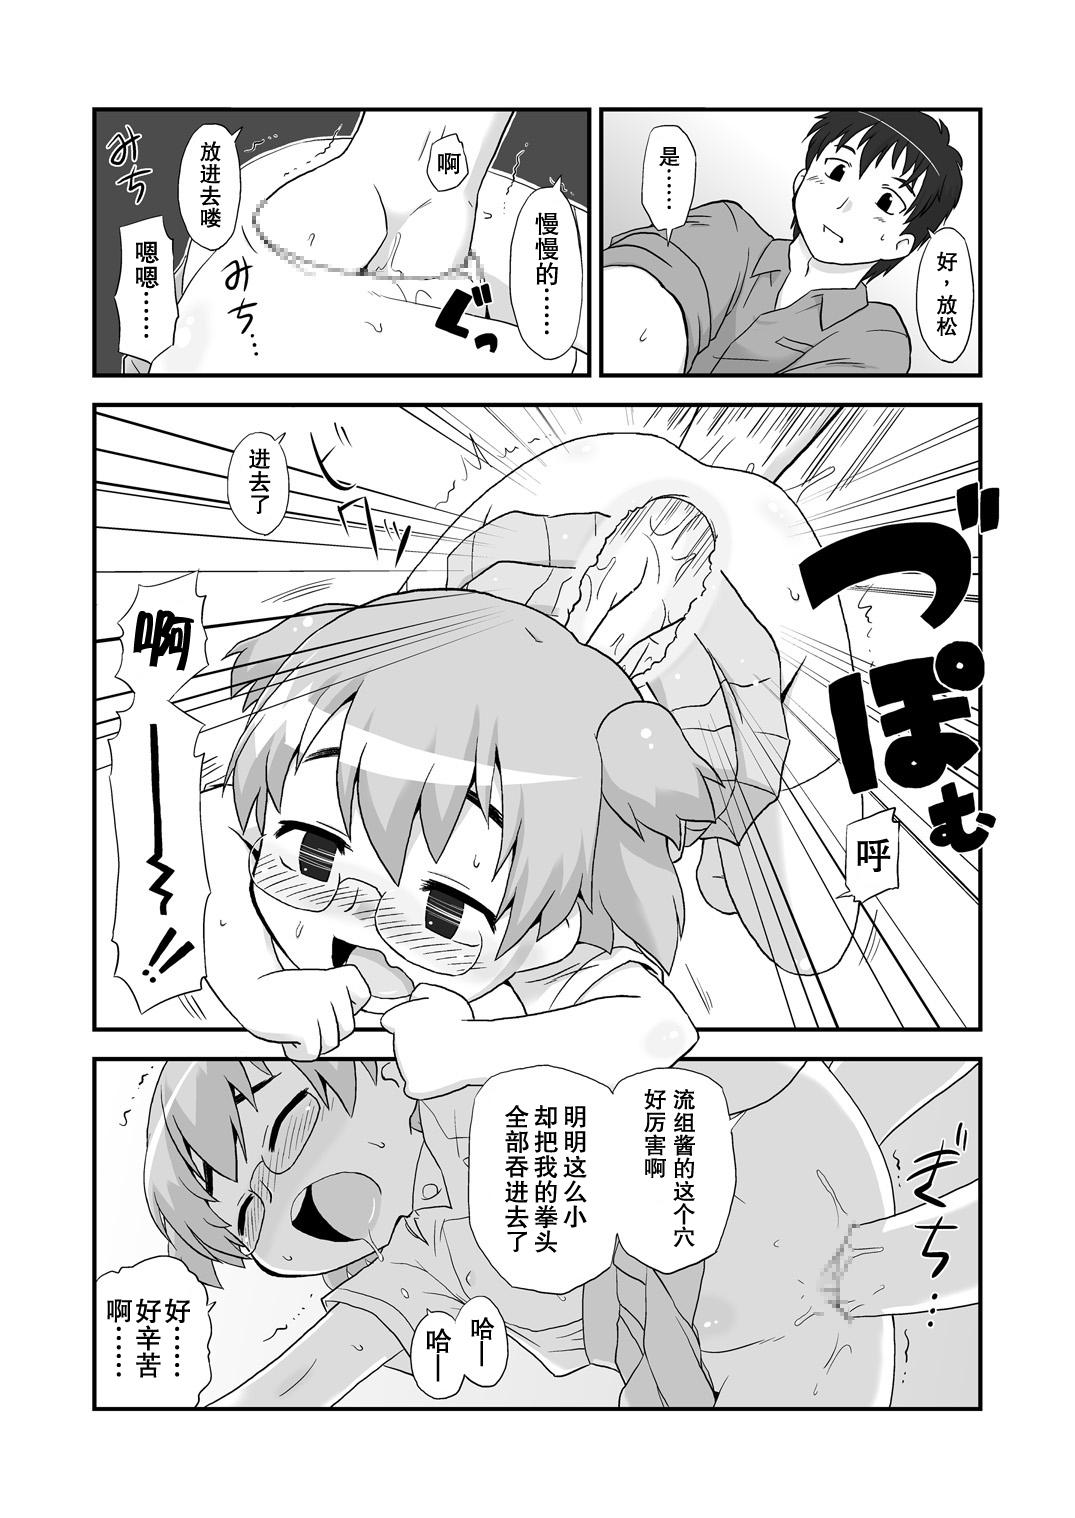 Pussyeating Hirogacchattemo ii no 1-6 + Special Close Up - Page 7